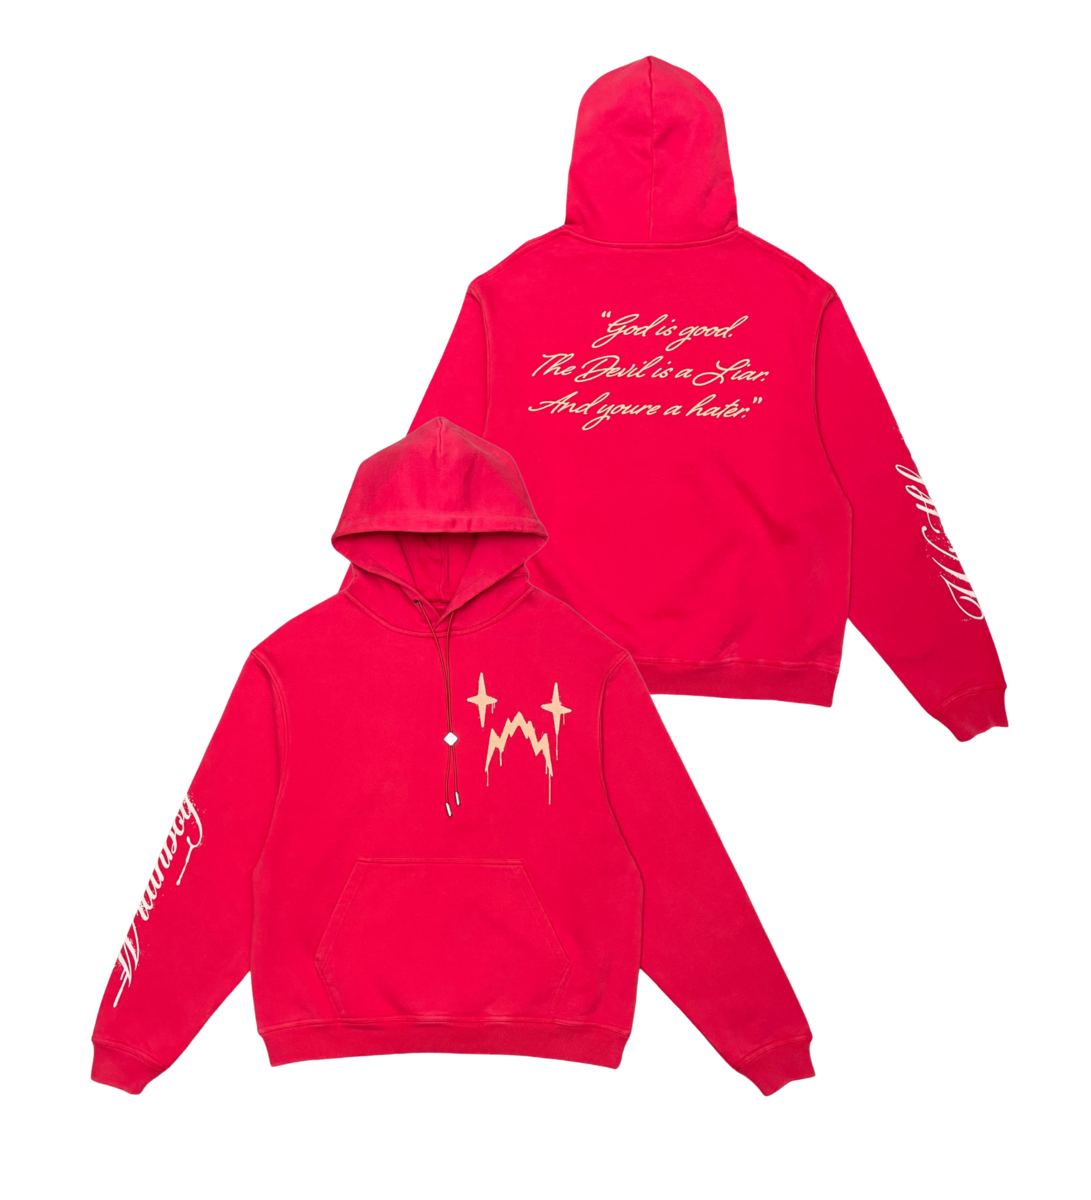 Hater Ghost Hoodie - Red